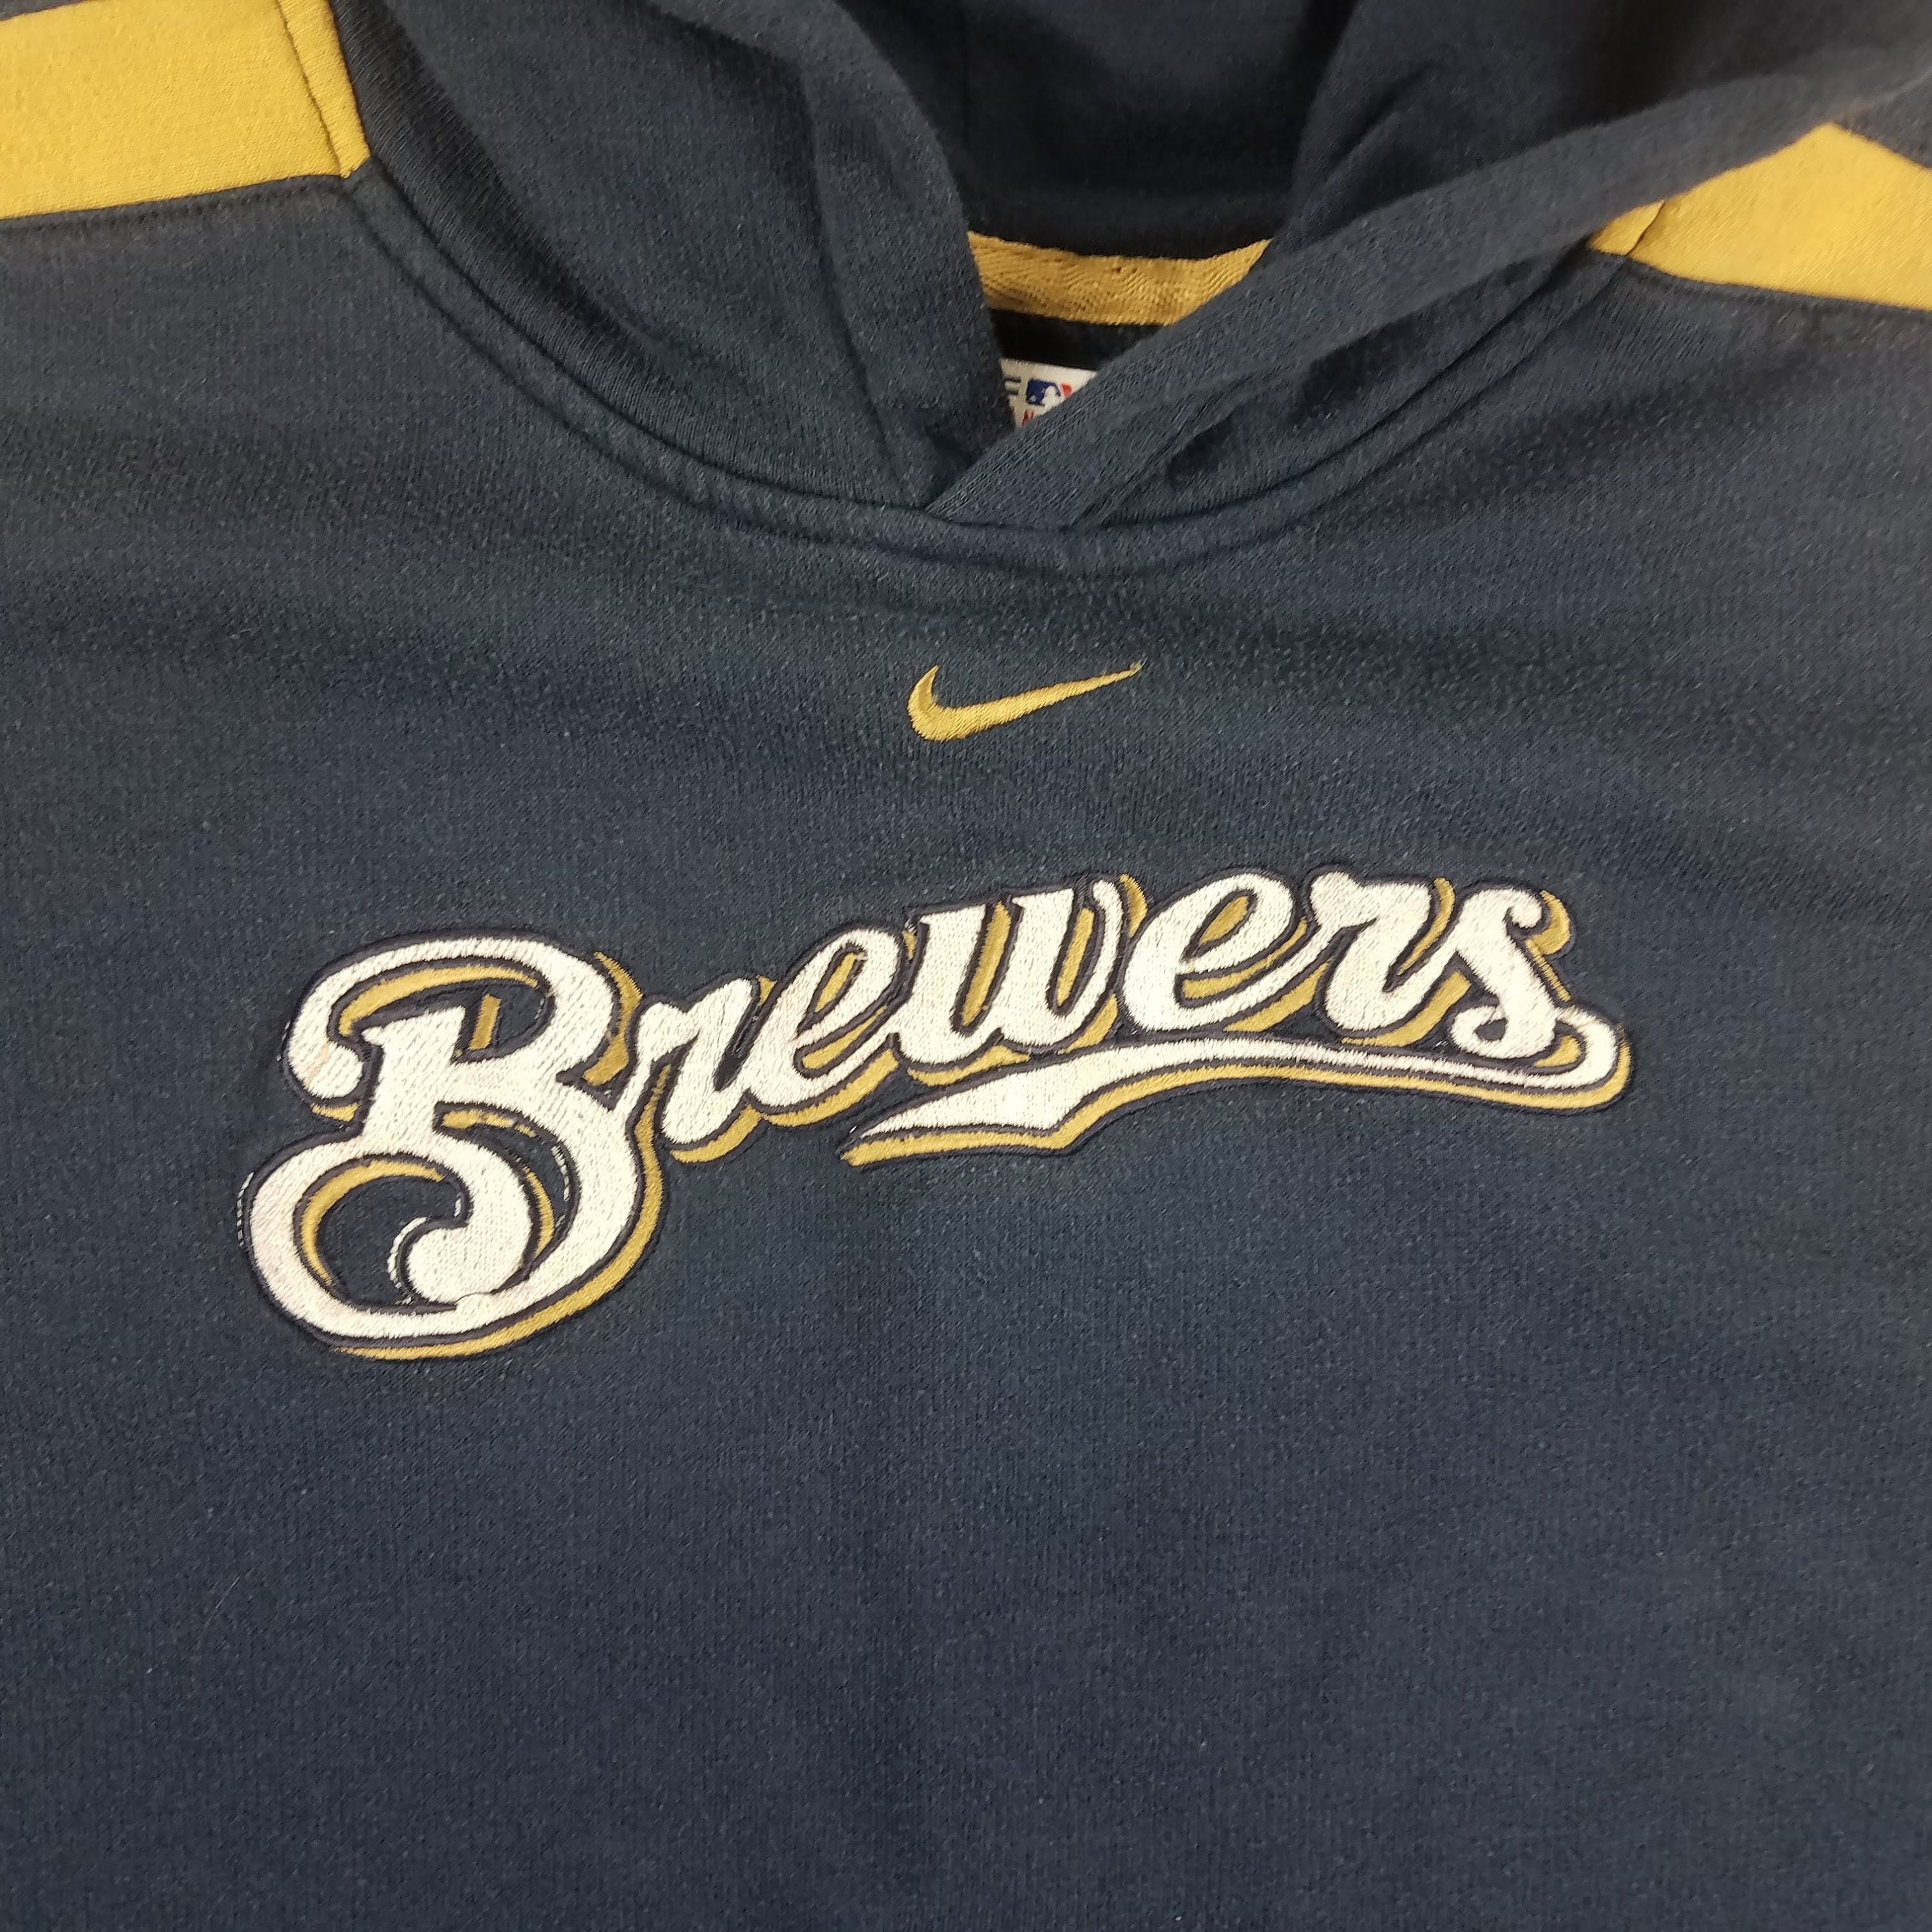 SecondGuessers Vintage 2000s Y2K Milwaukee Brewers MLB Baseball Nike Center Swoosh Navy Blue Hoodie Sweatshirt Size Medium / Small in Good Condition